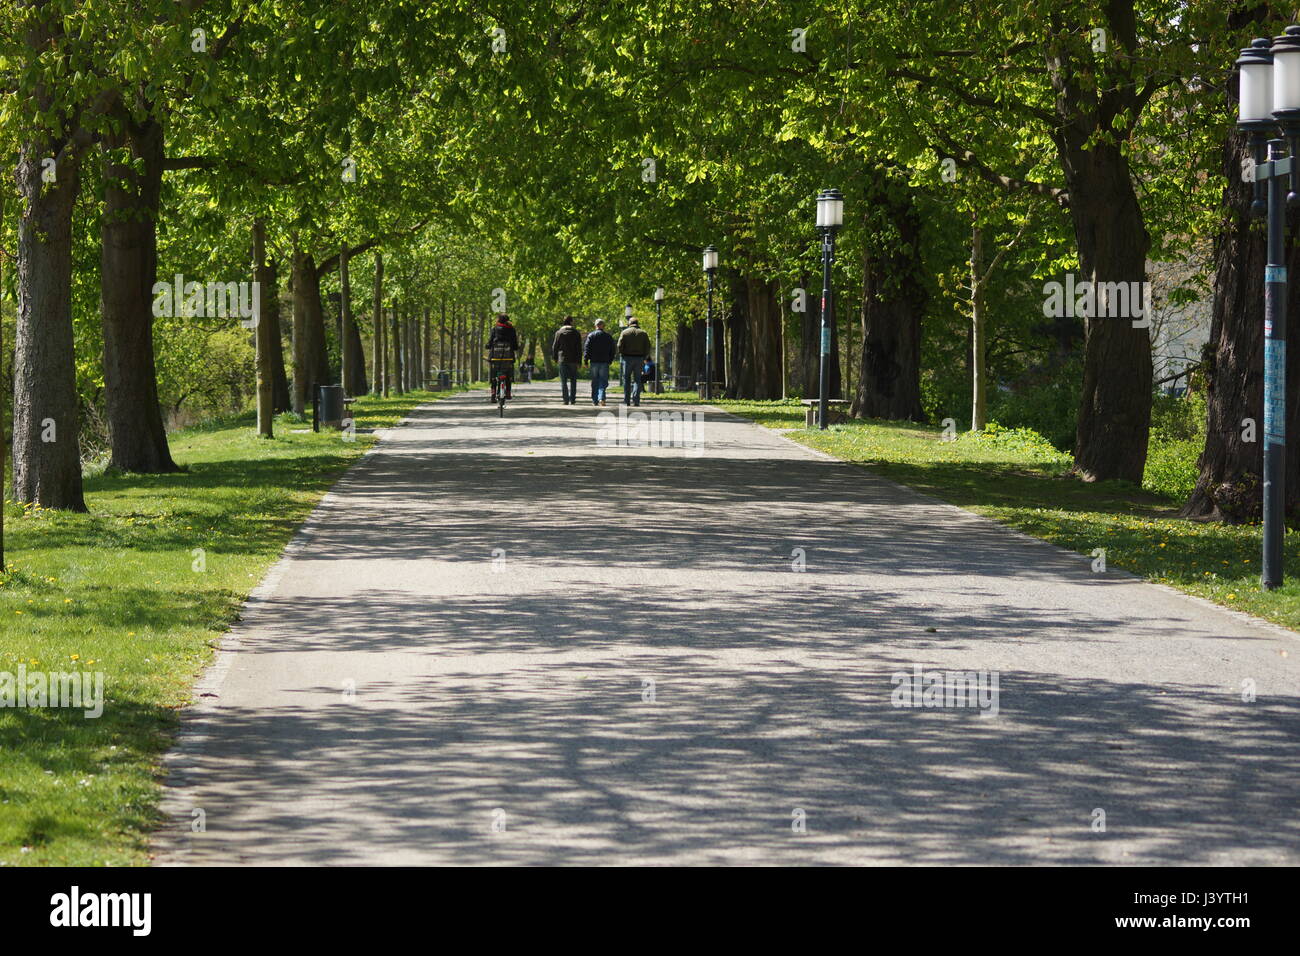 Boulevard with green trees Stock Photo